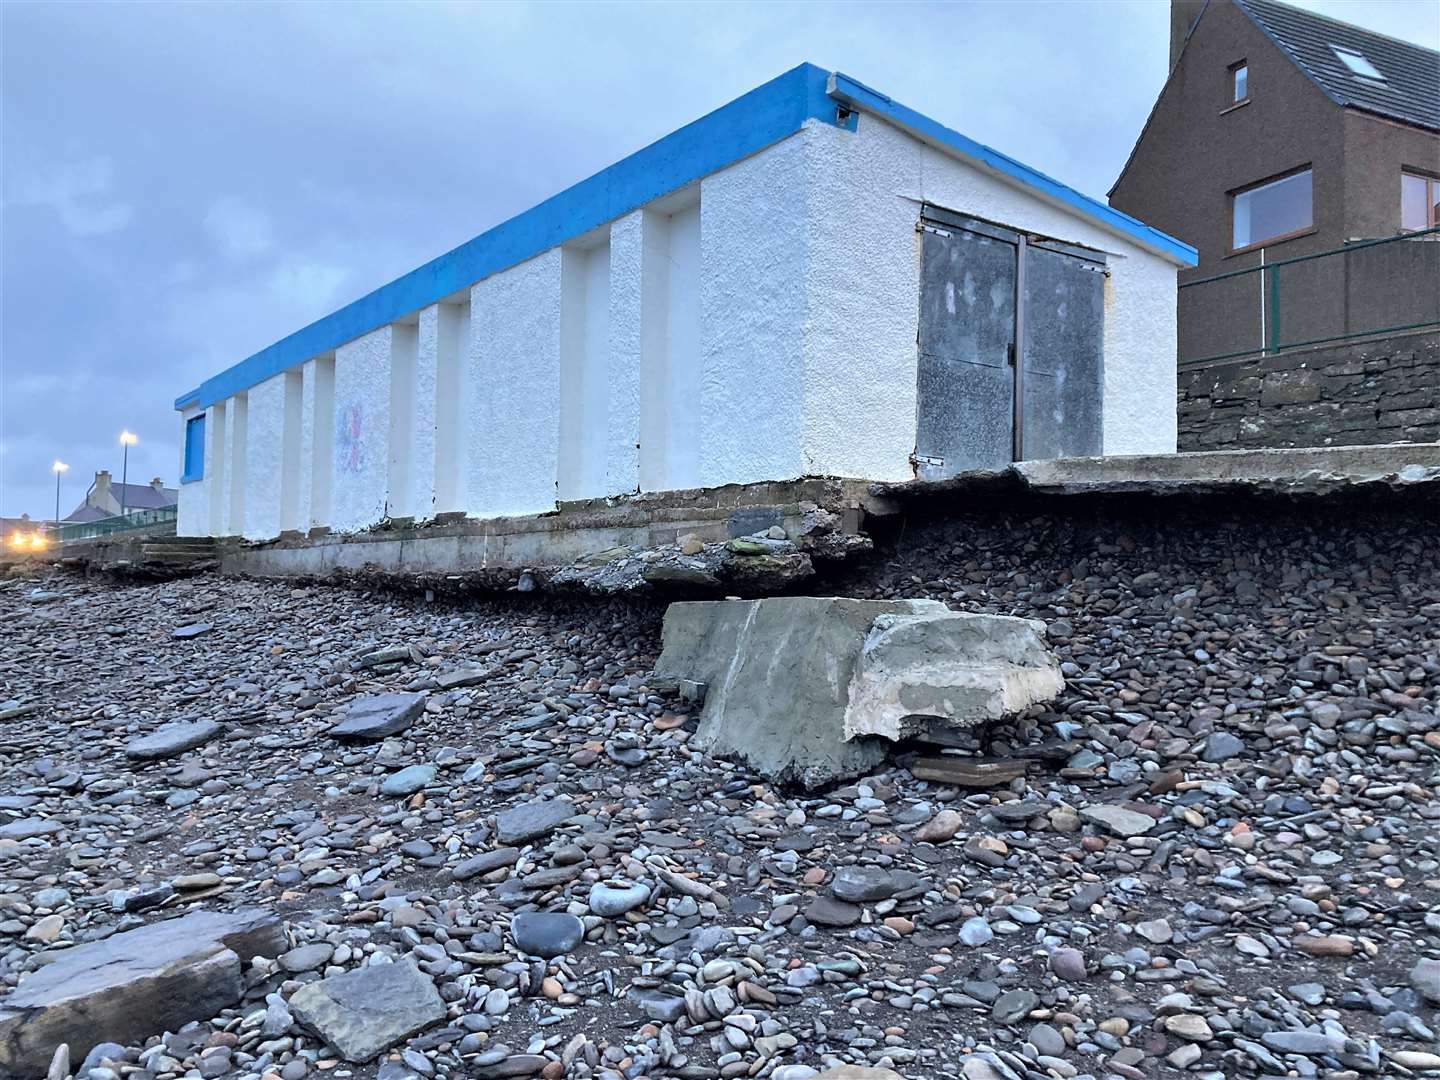 The canoe club hut was seriously undermined by coastal erosion, as can be seen in this photo from January last year. Picture: Matthew Reiss